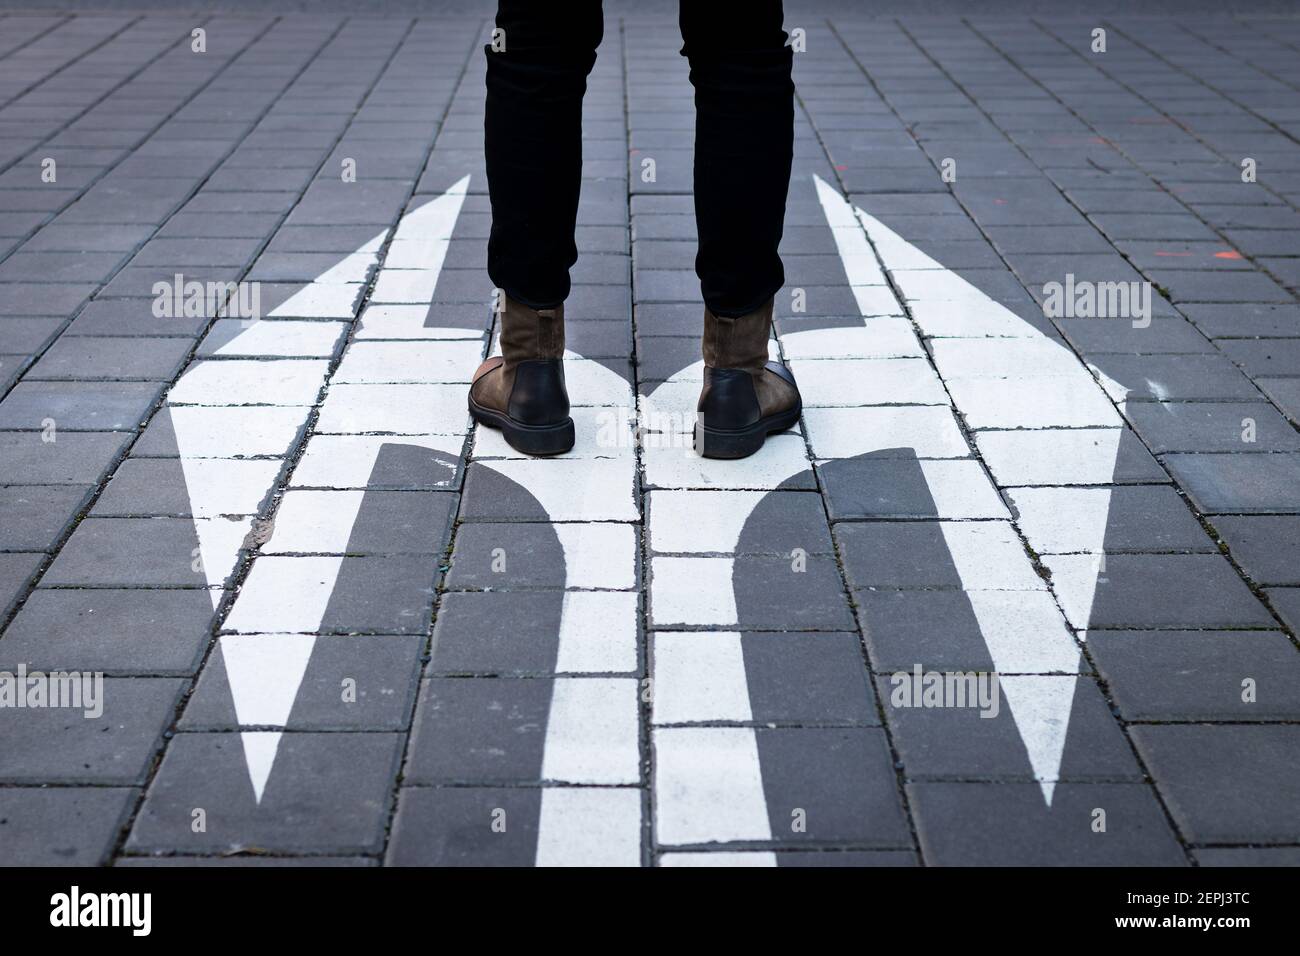 Make decision which way to go. Walking at directional sign on road. Choice concept with human legs and arrow symbol on street Stock Photo